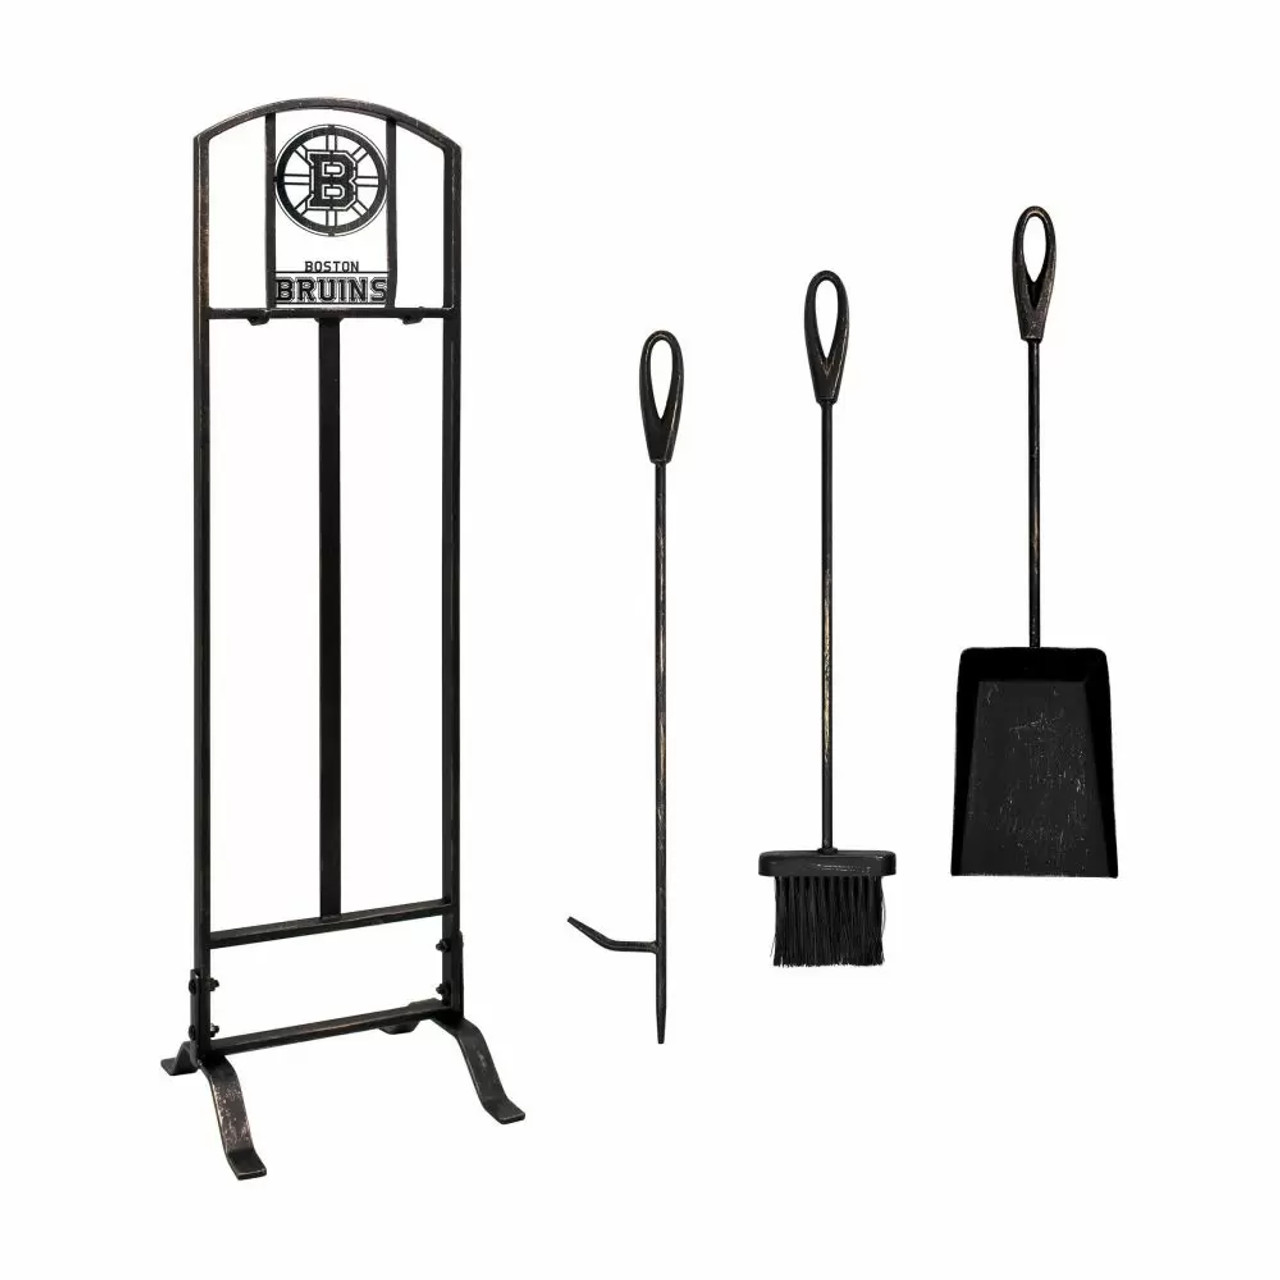 837-4001, Boston, Bruins, 3-PC, WI, Wrought Iron, Bronze, NHL, Imperial, Fireplace, Tool Set, FREE SHIPPING